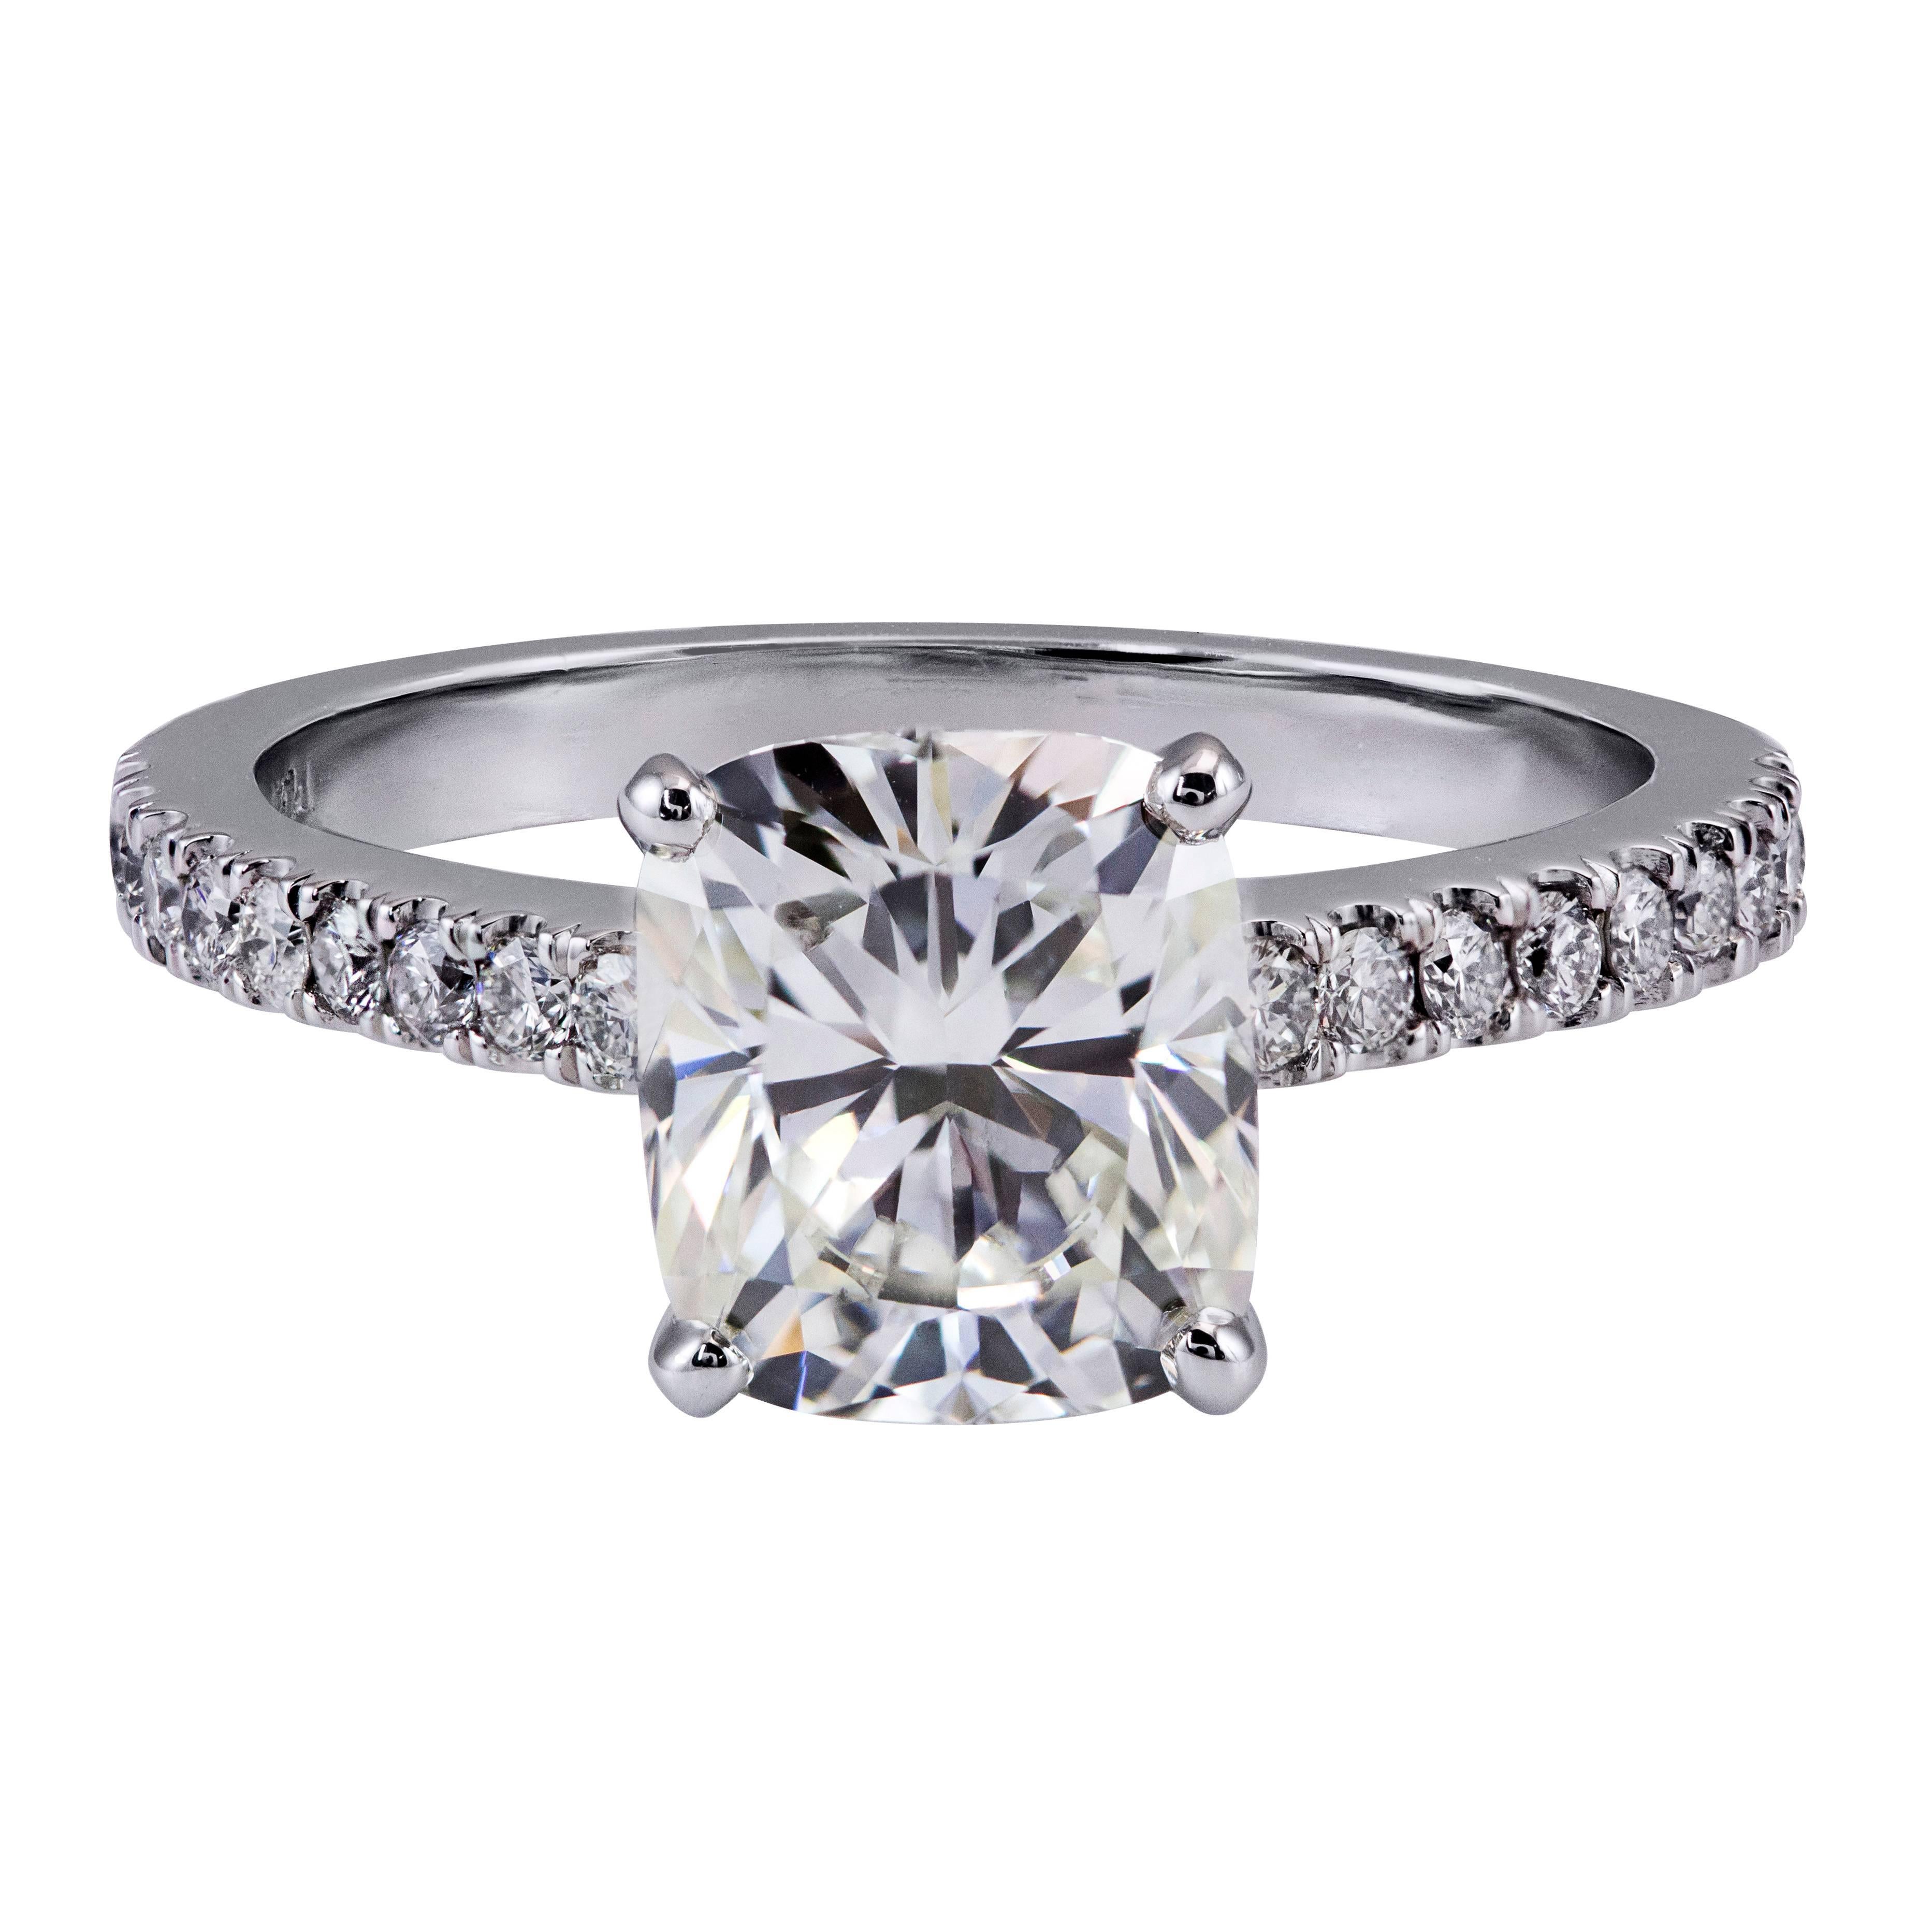 2.03 Carat GIA Certified Cushion Cut Diamond Solitaire Engagement Ring